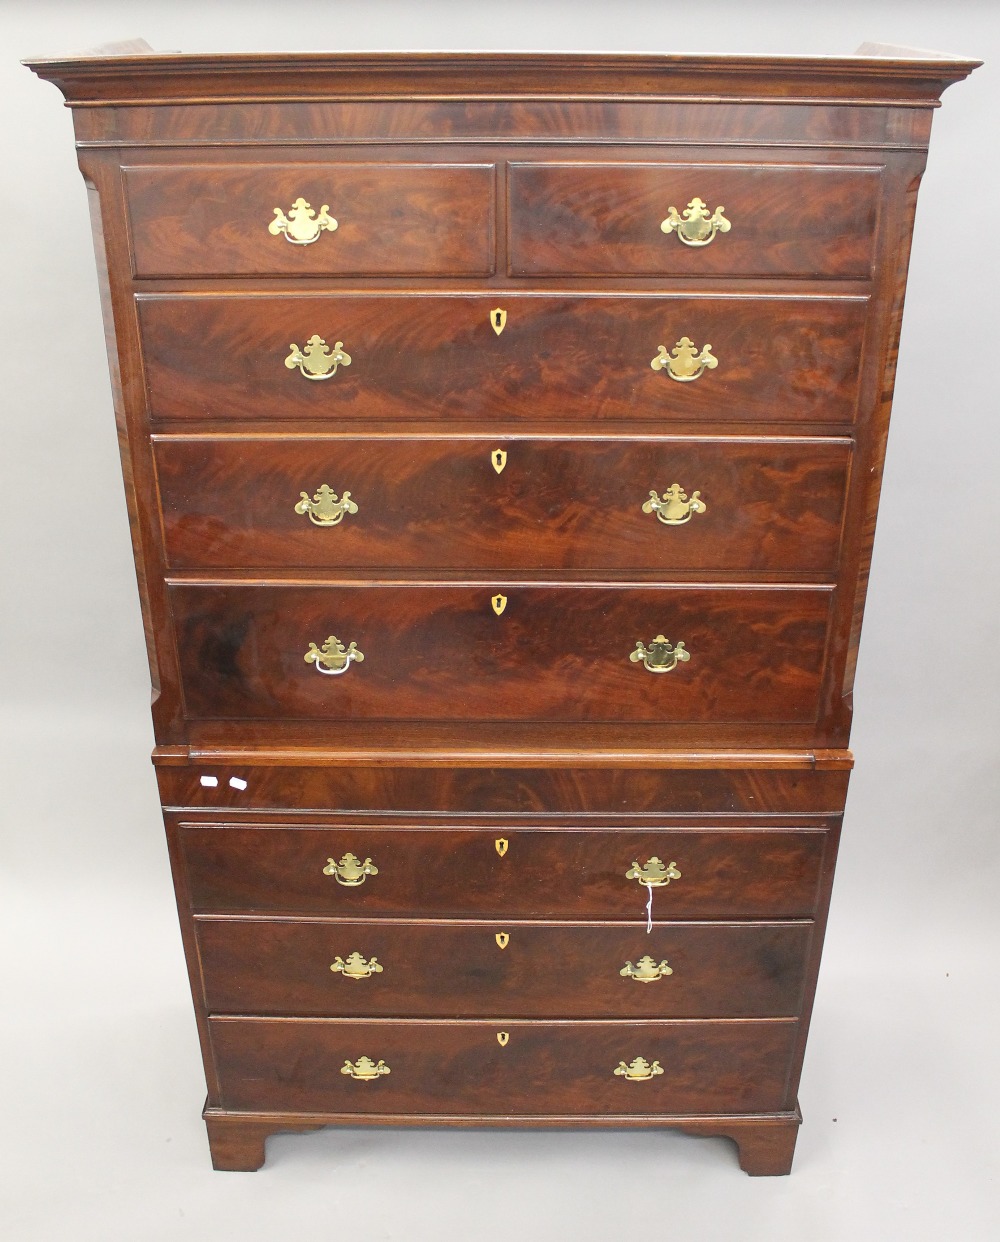 WITHDRAWN A 19th century mahogany chest on chest. 191 cm high x 115.5 cm wide.